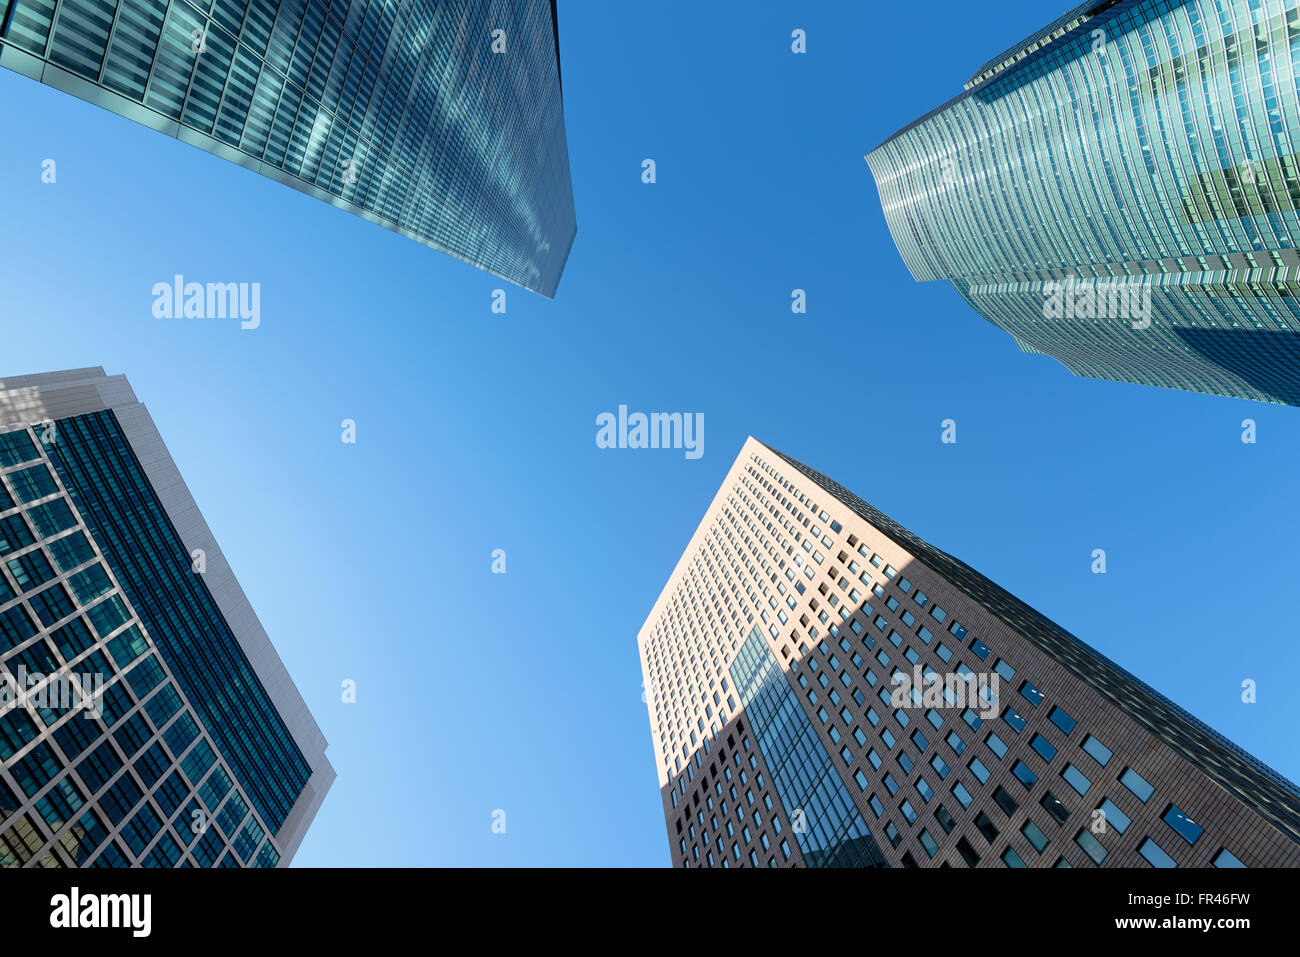 Shiodome financial district in Tokyo - Japan. Stock Photo